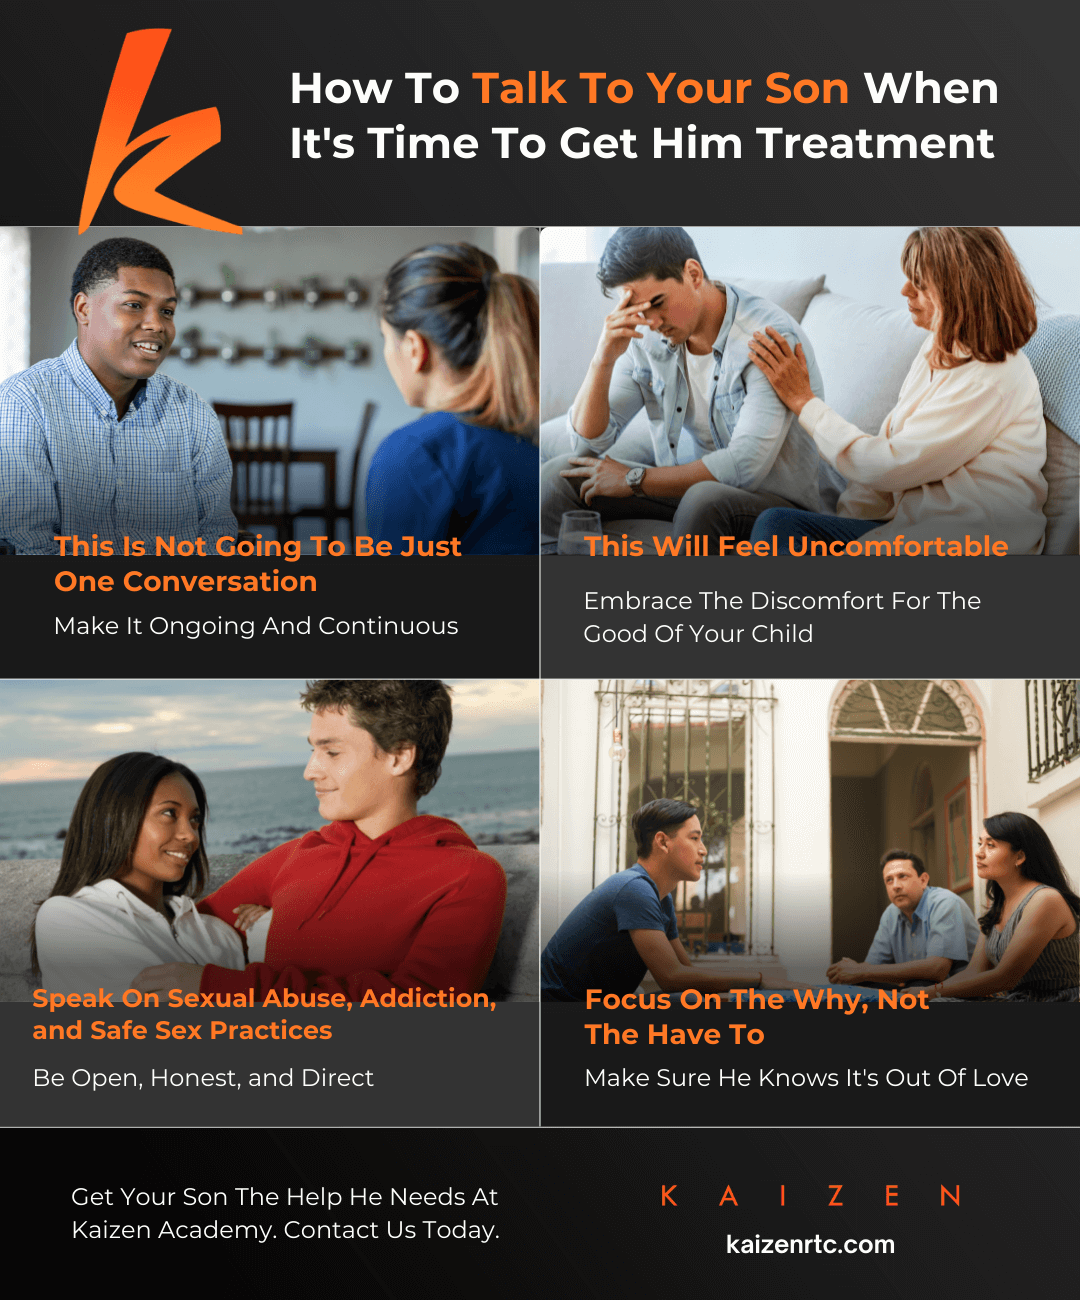 Infographic-How-To-Talk-To-Your-Son-When-Its-Time-To-Get-Him-Treatment-62bc7176a20cb.png